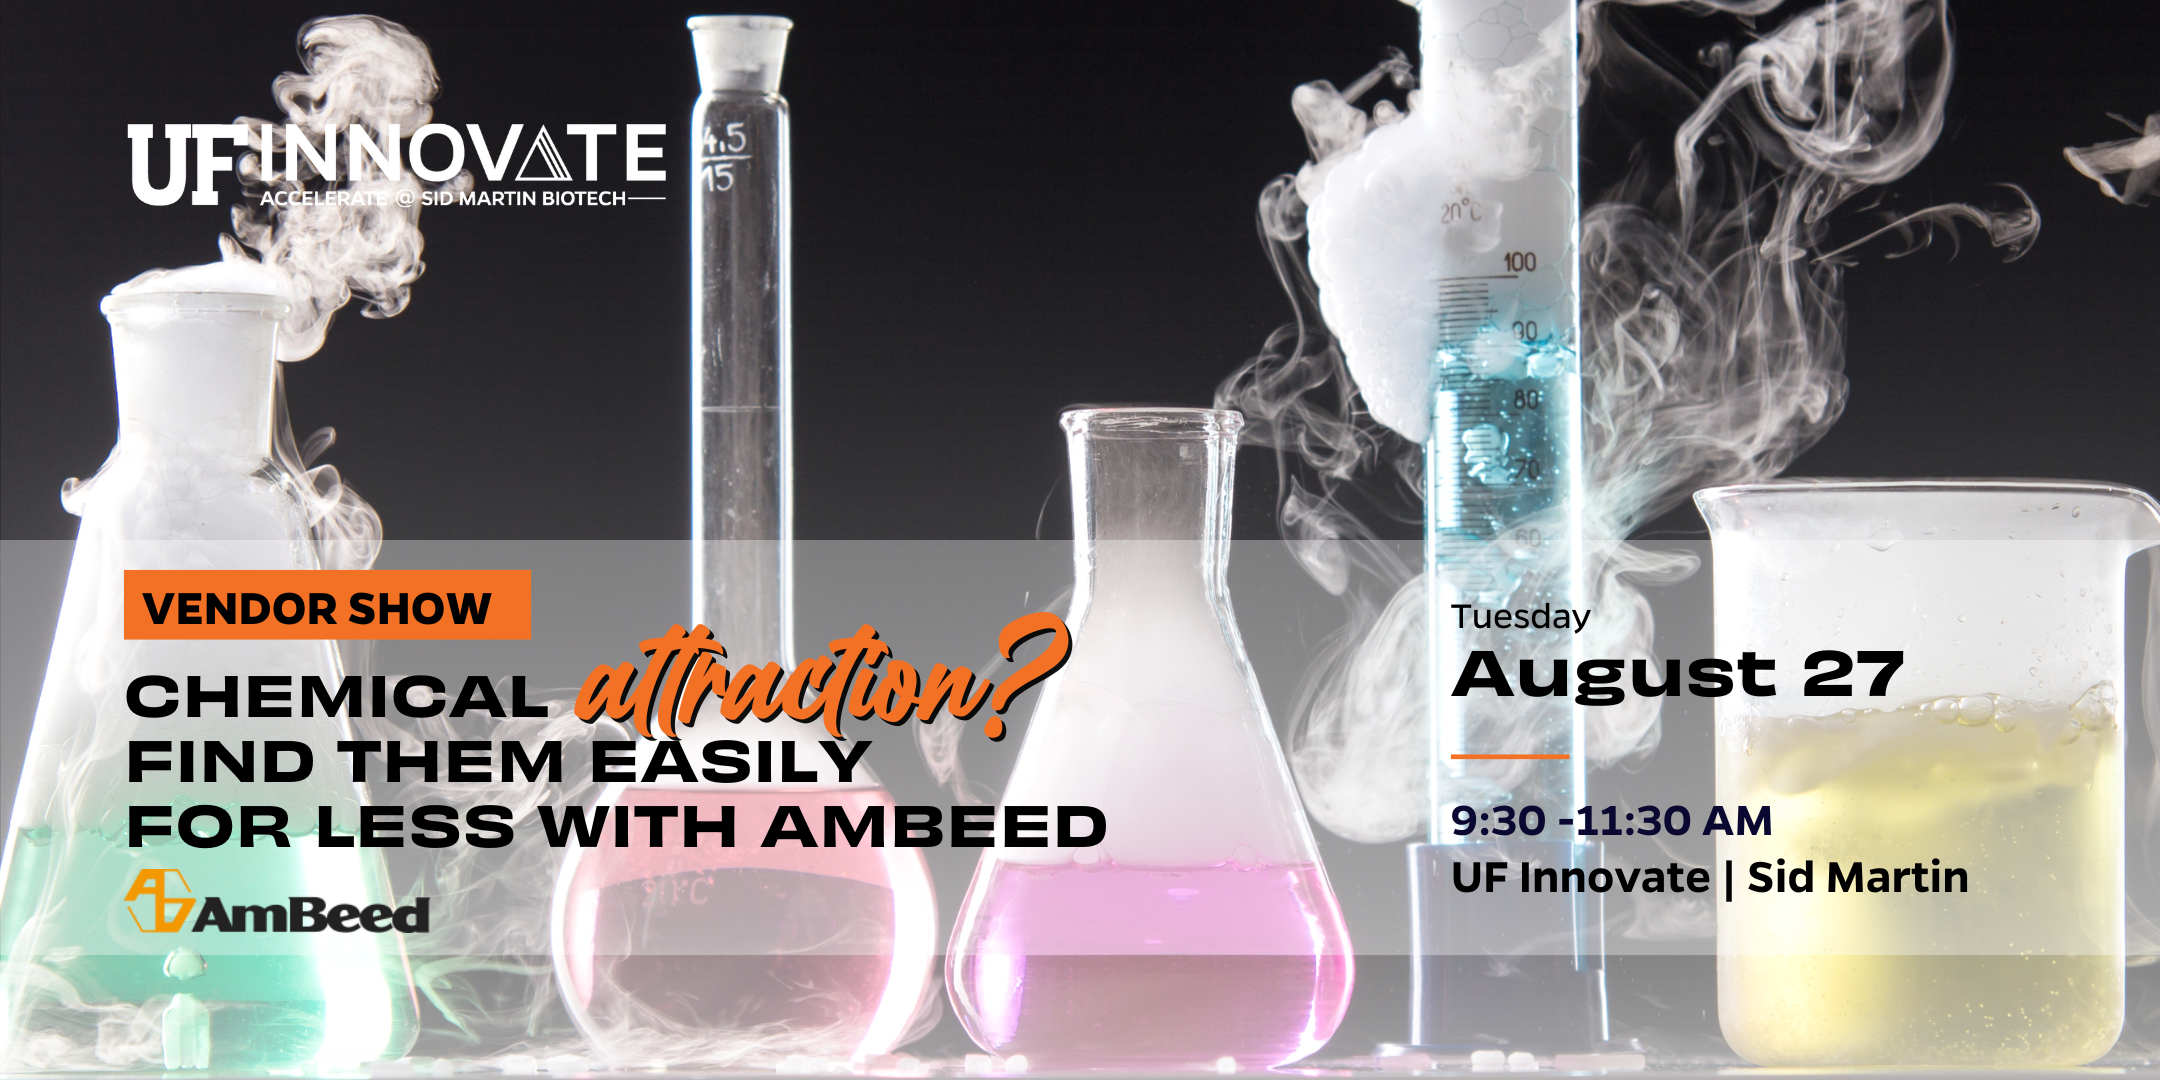 Graphic depicting chemicals in various beakers and test tubes to demonstrate the vendor show at Sid Martin Biotech on August 27 will feature chemicals from vendor AmBeed